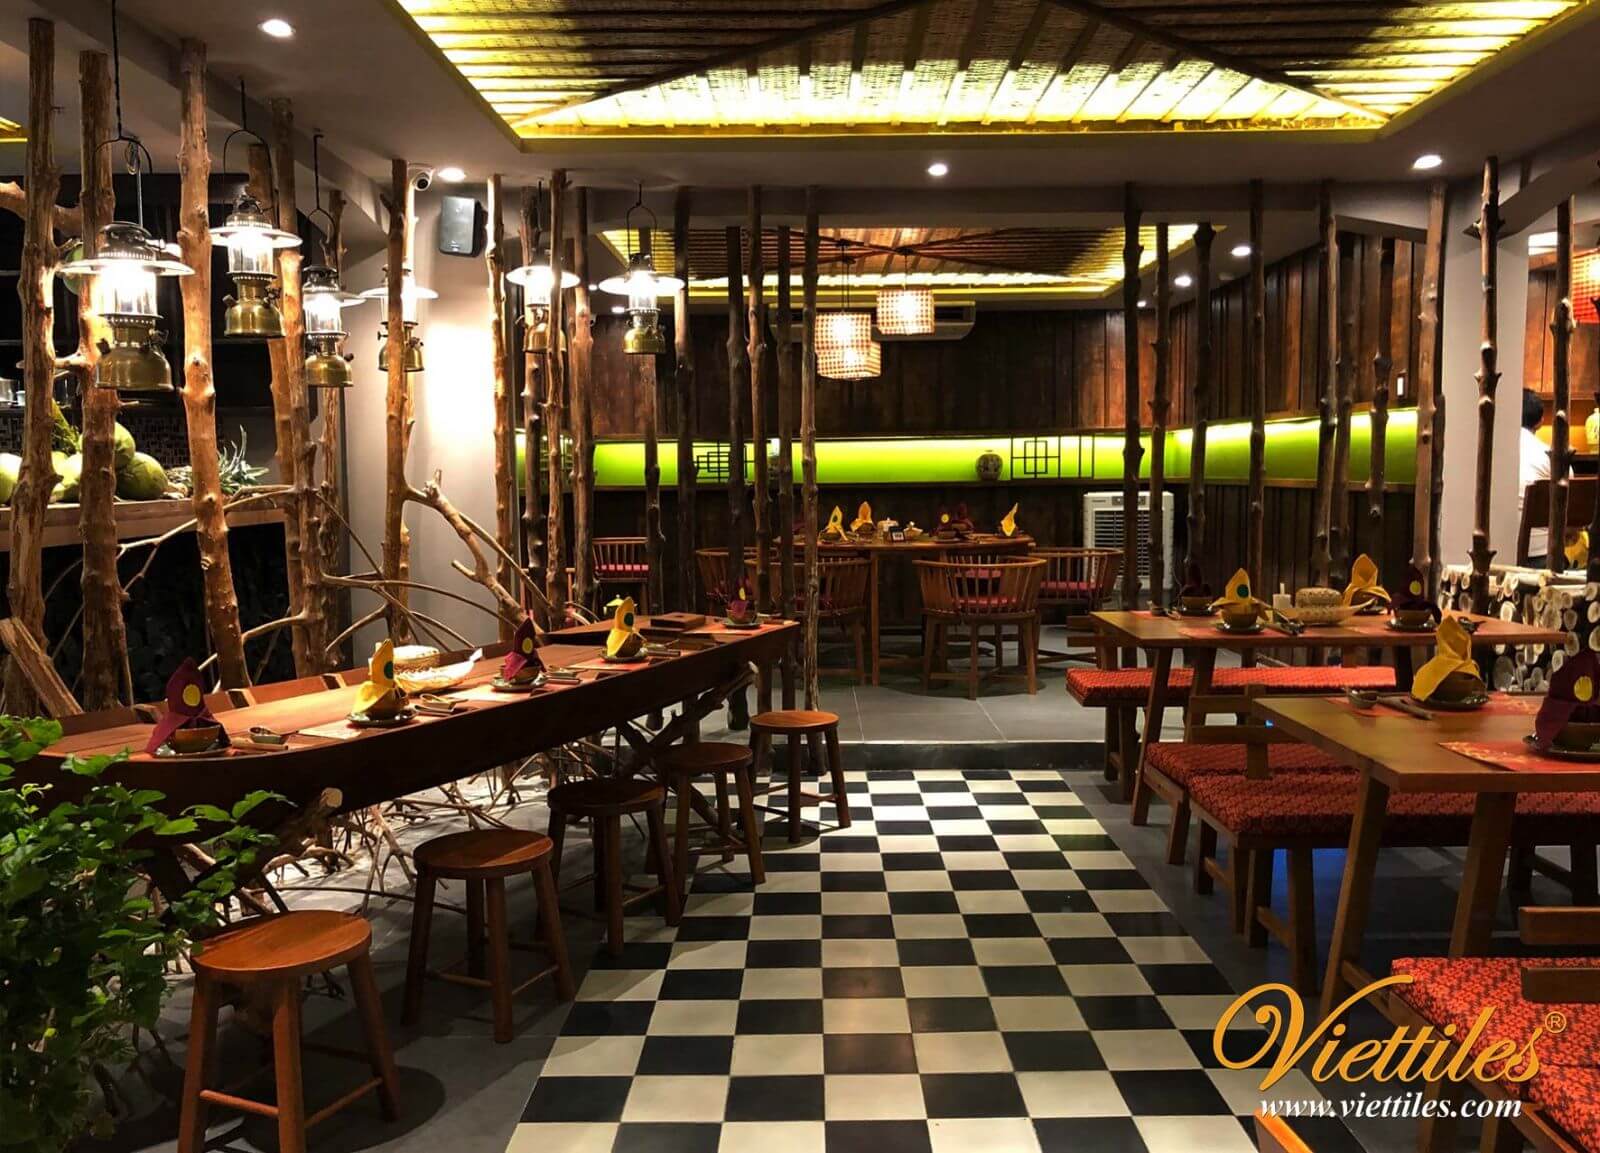 Viettiles's cement tiles with black and white colors is trusted and used by Bep Nha Luc Tinh Restaurant